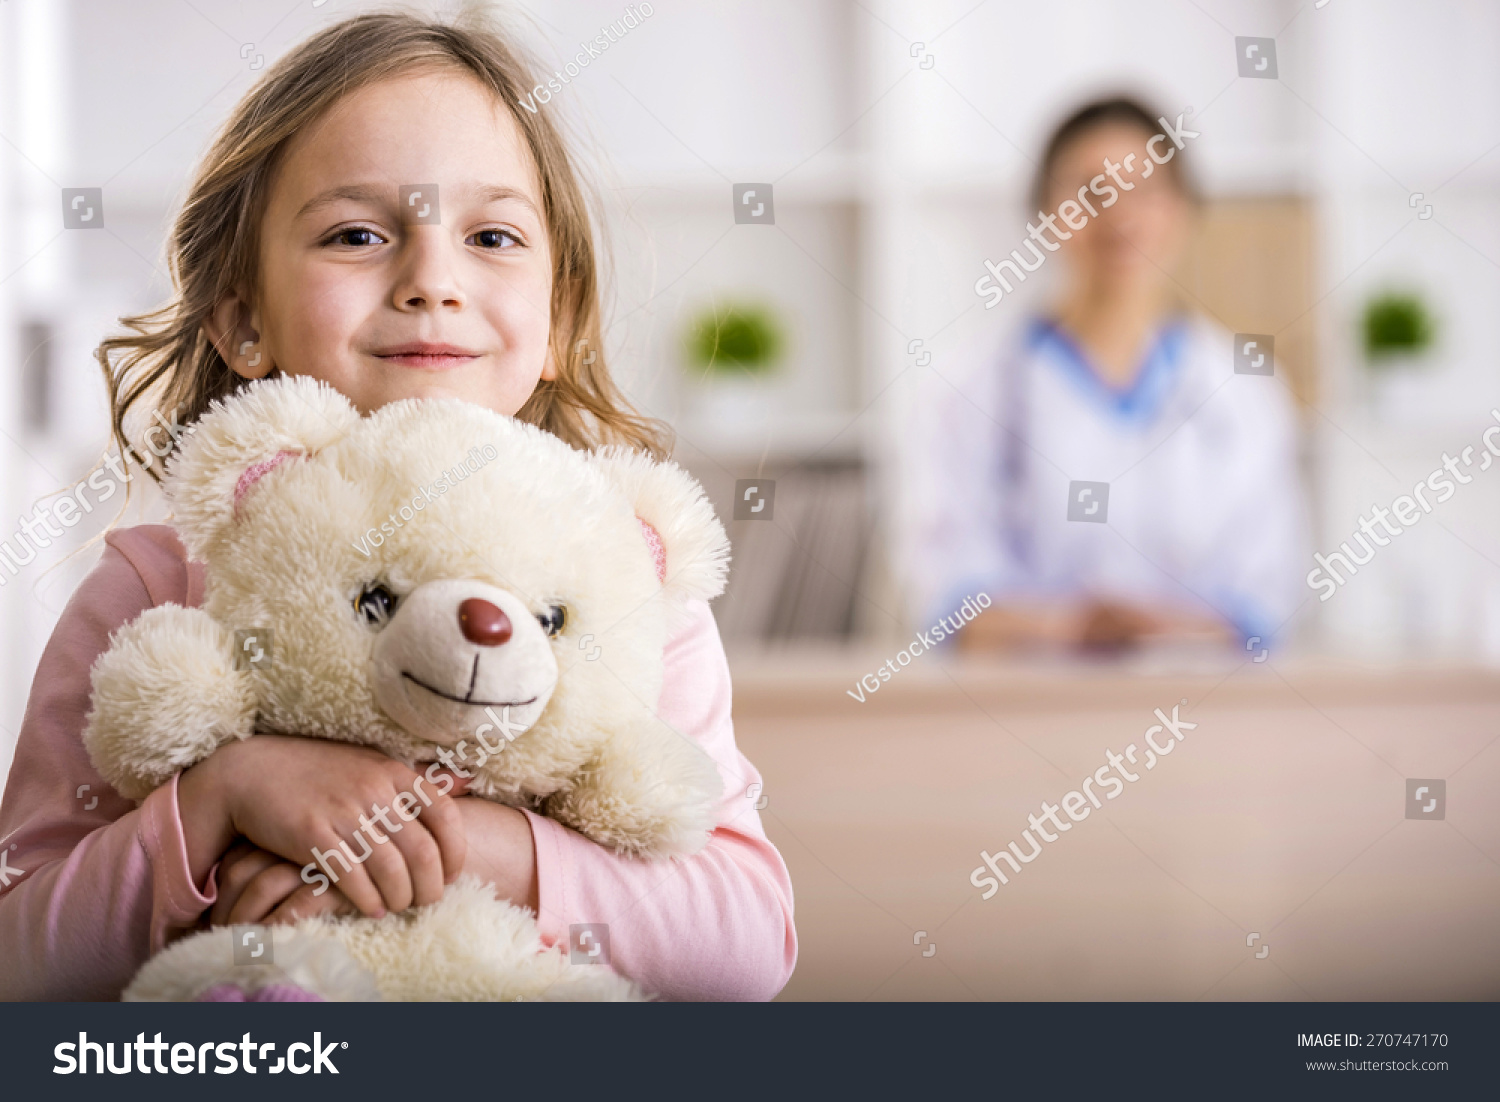 Little girl with teddy bear is looking at the camera. Female doctor on background. #270747170